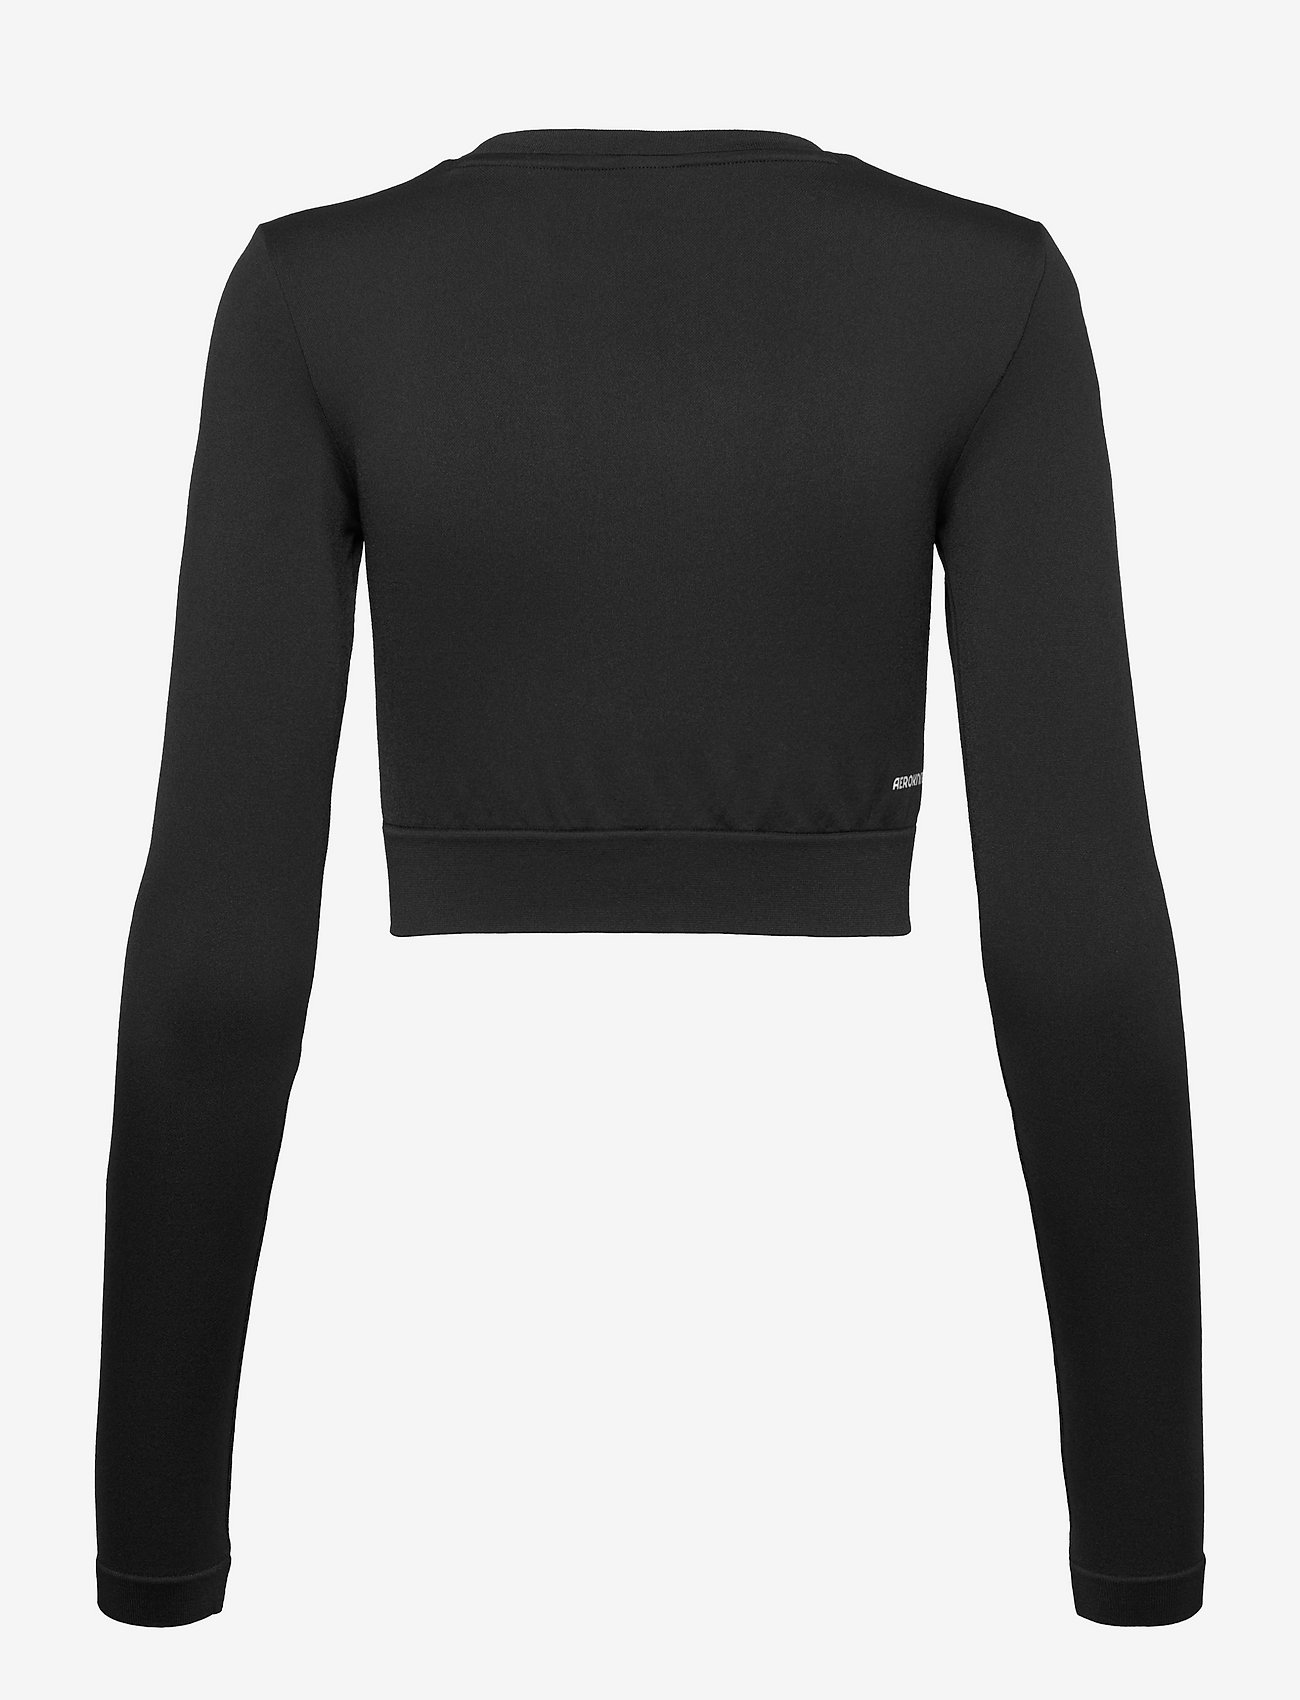 adidas Performance - adidas AEROKNIT Seamless Fitted Cropped Long-Sleeve Top - laveste priser - black/white - 1